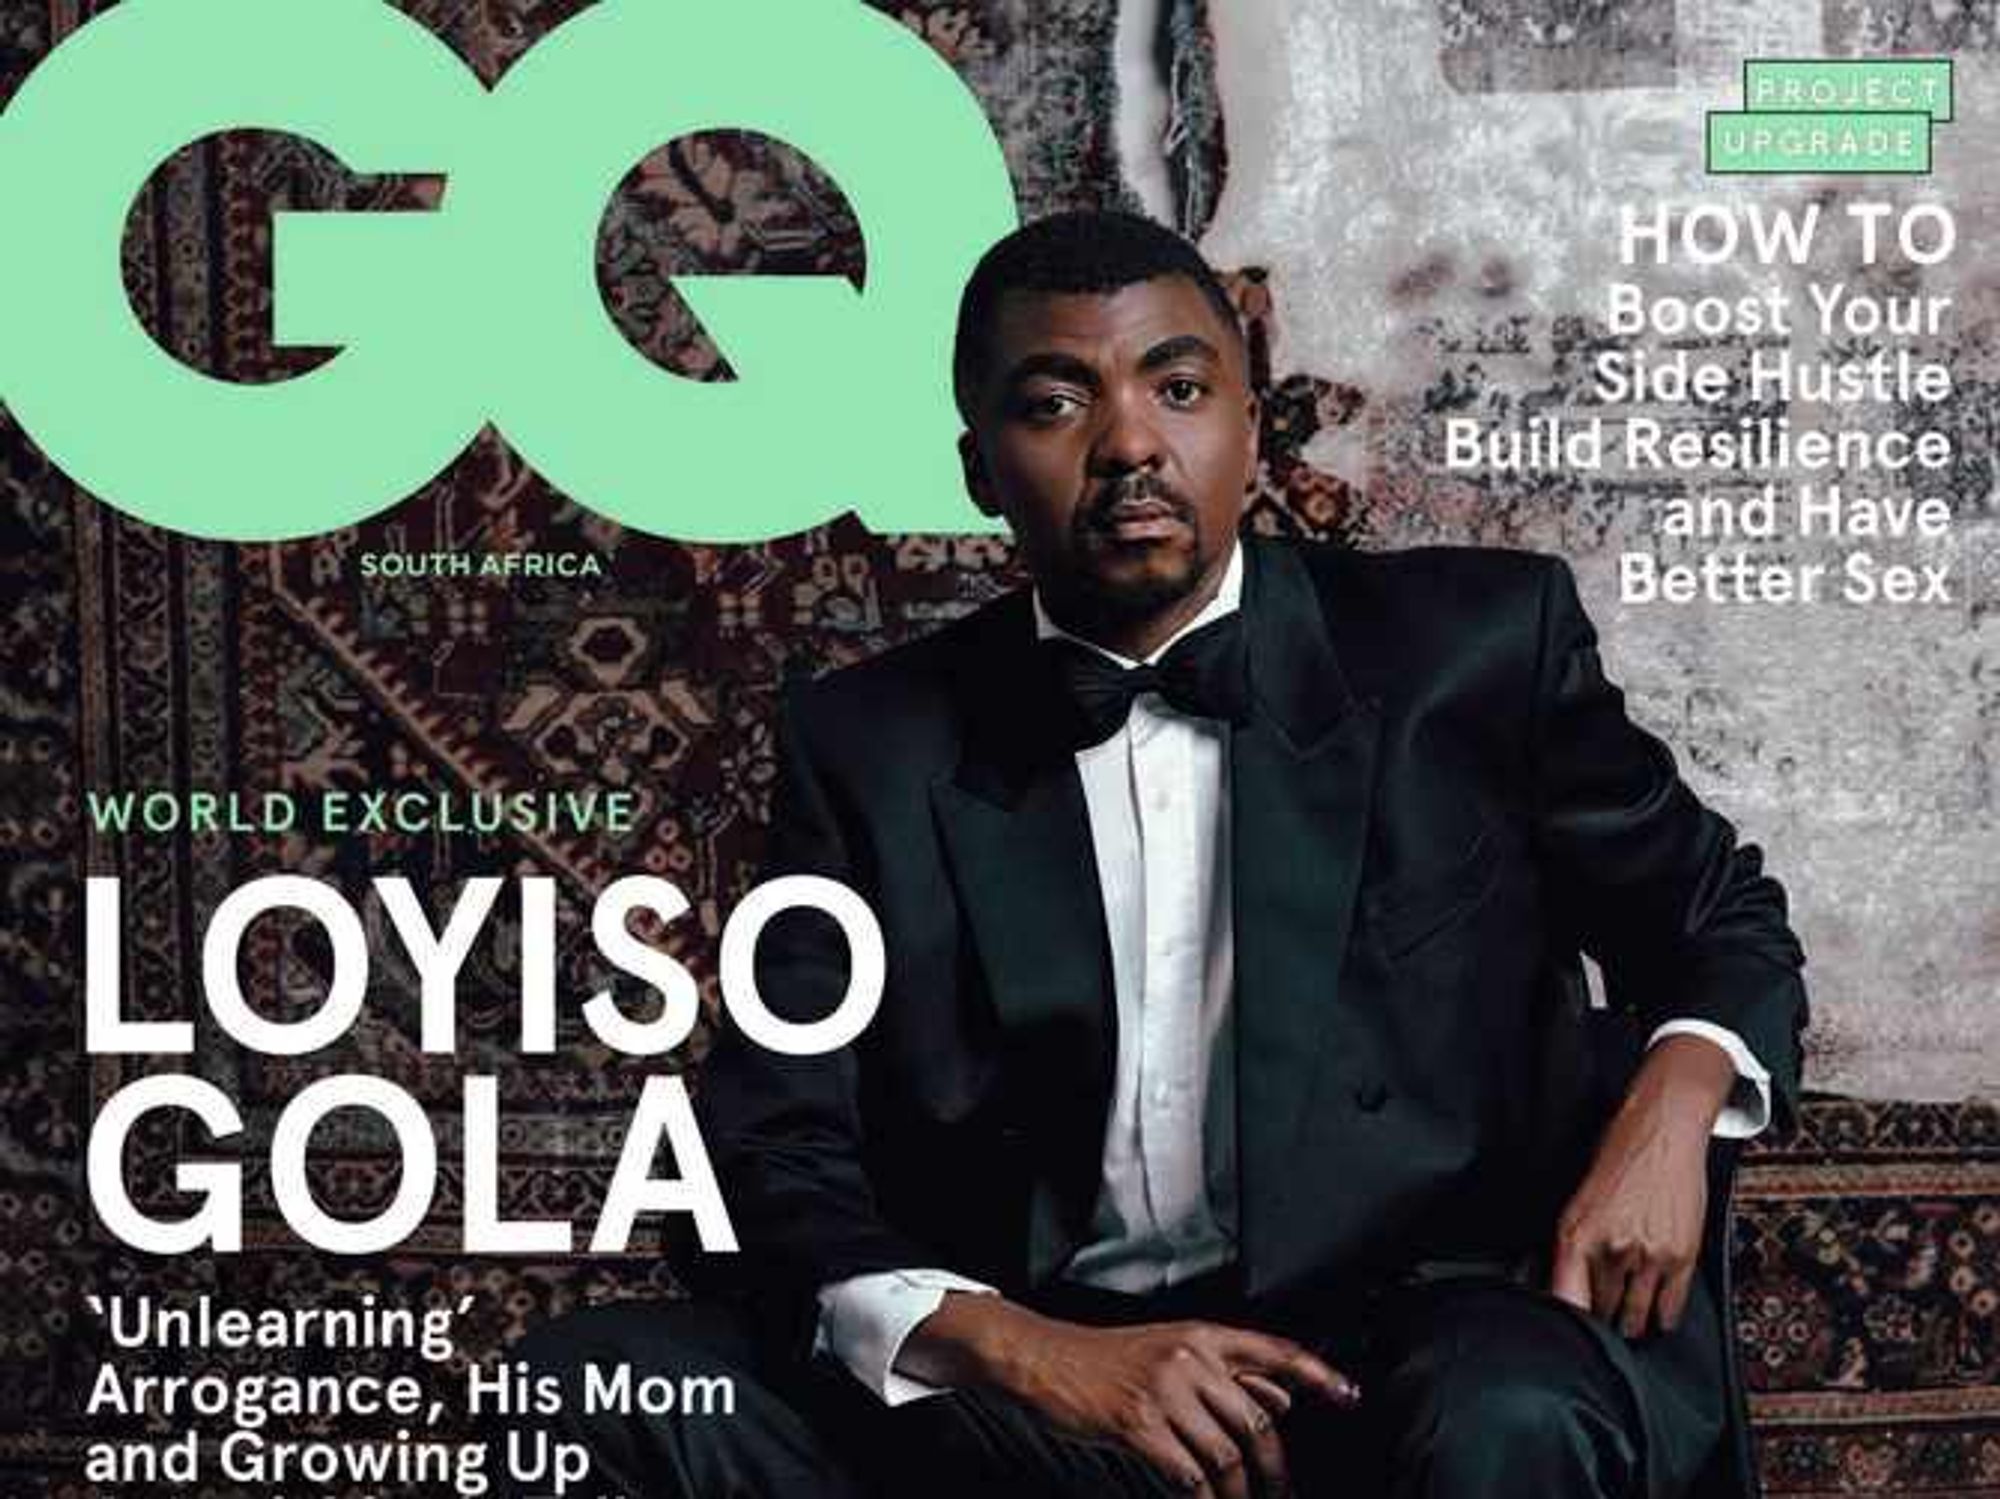 A GQ South Africa magazine cover with Loyiso Gola as the cover star.